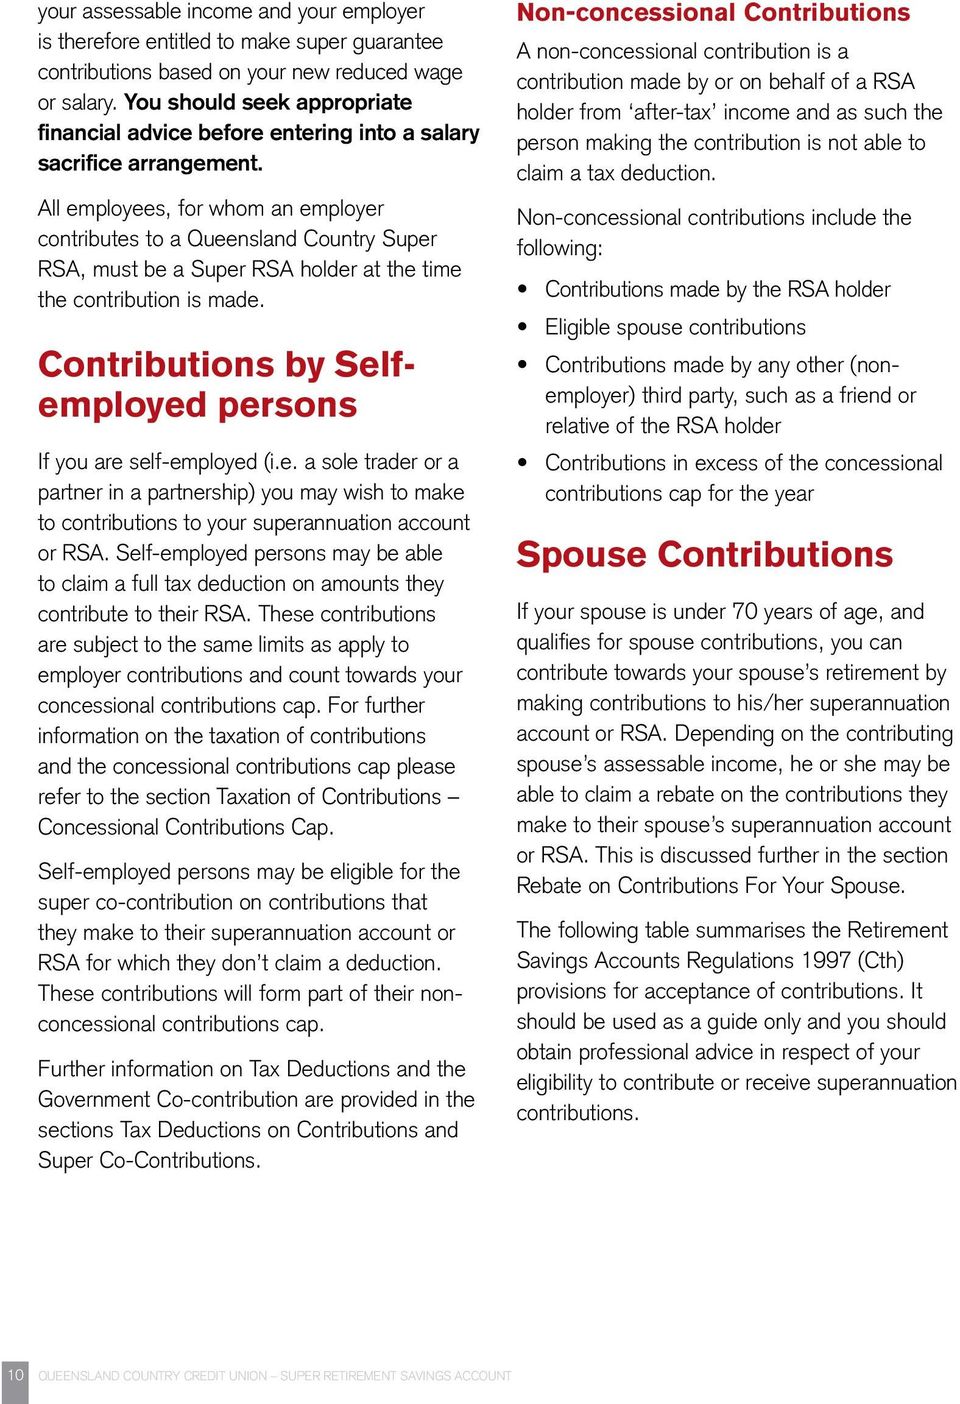 All employees, for whom an employer contributes to a Queensland Country Super RSA, must be a Super RSA holder at the time the contribution is made.